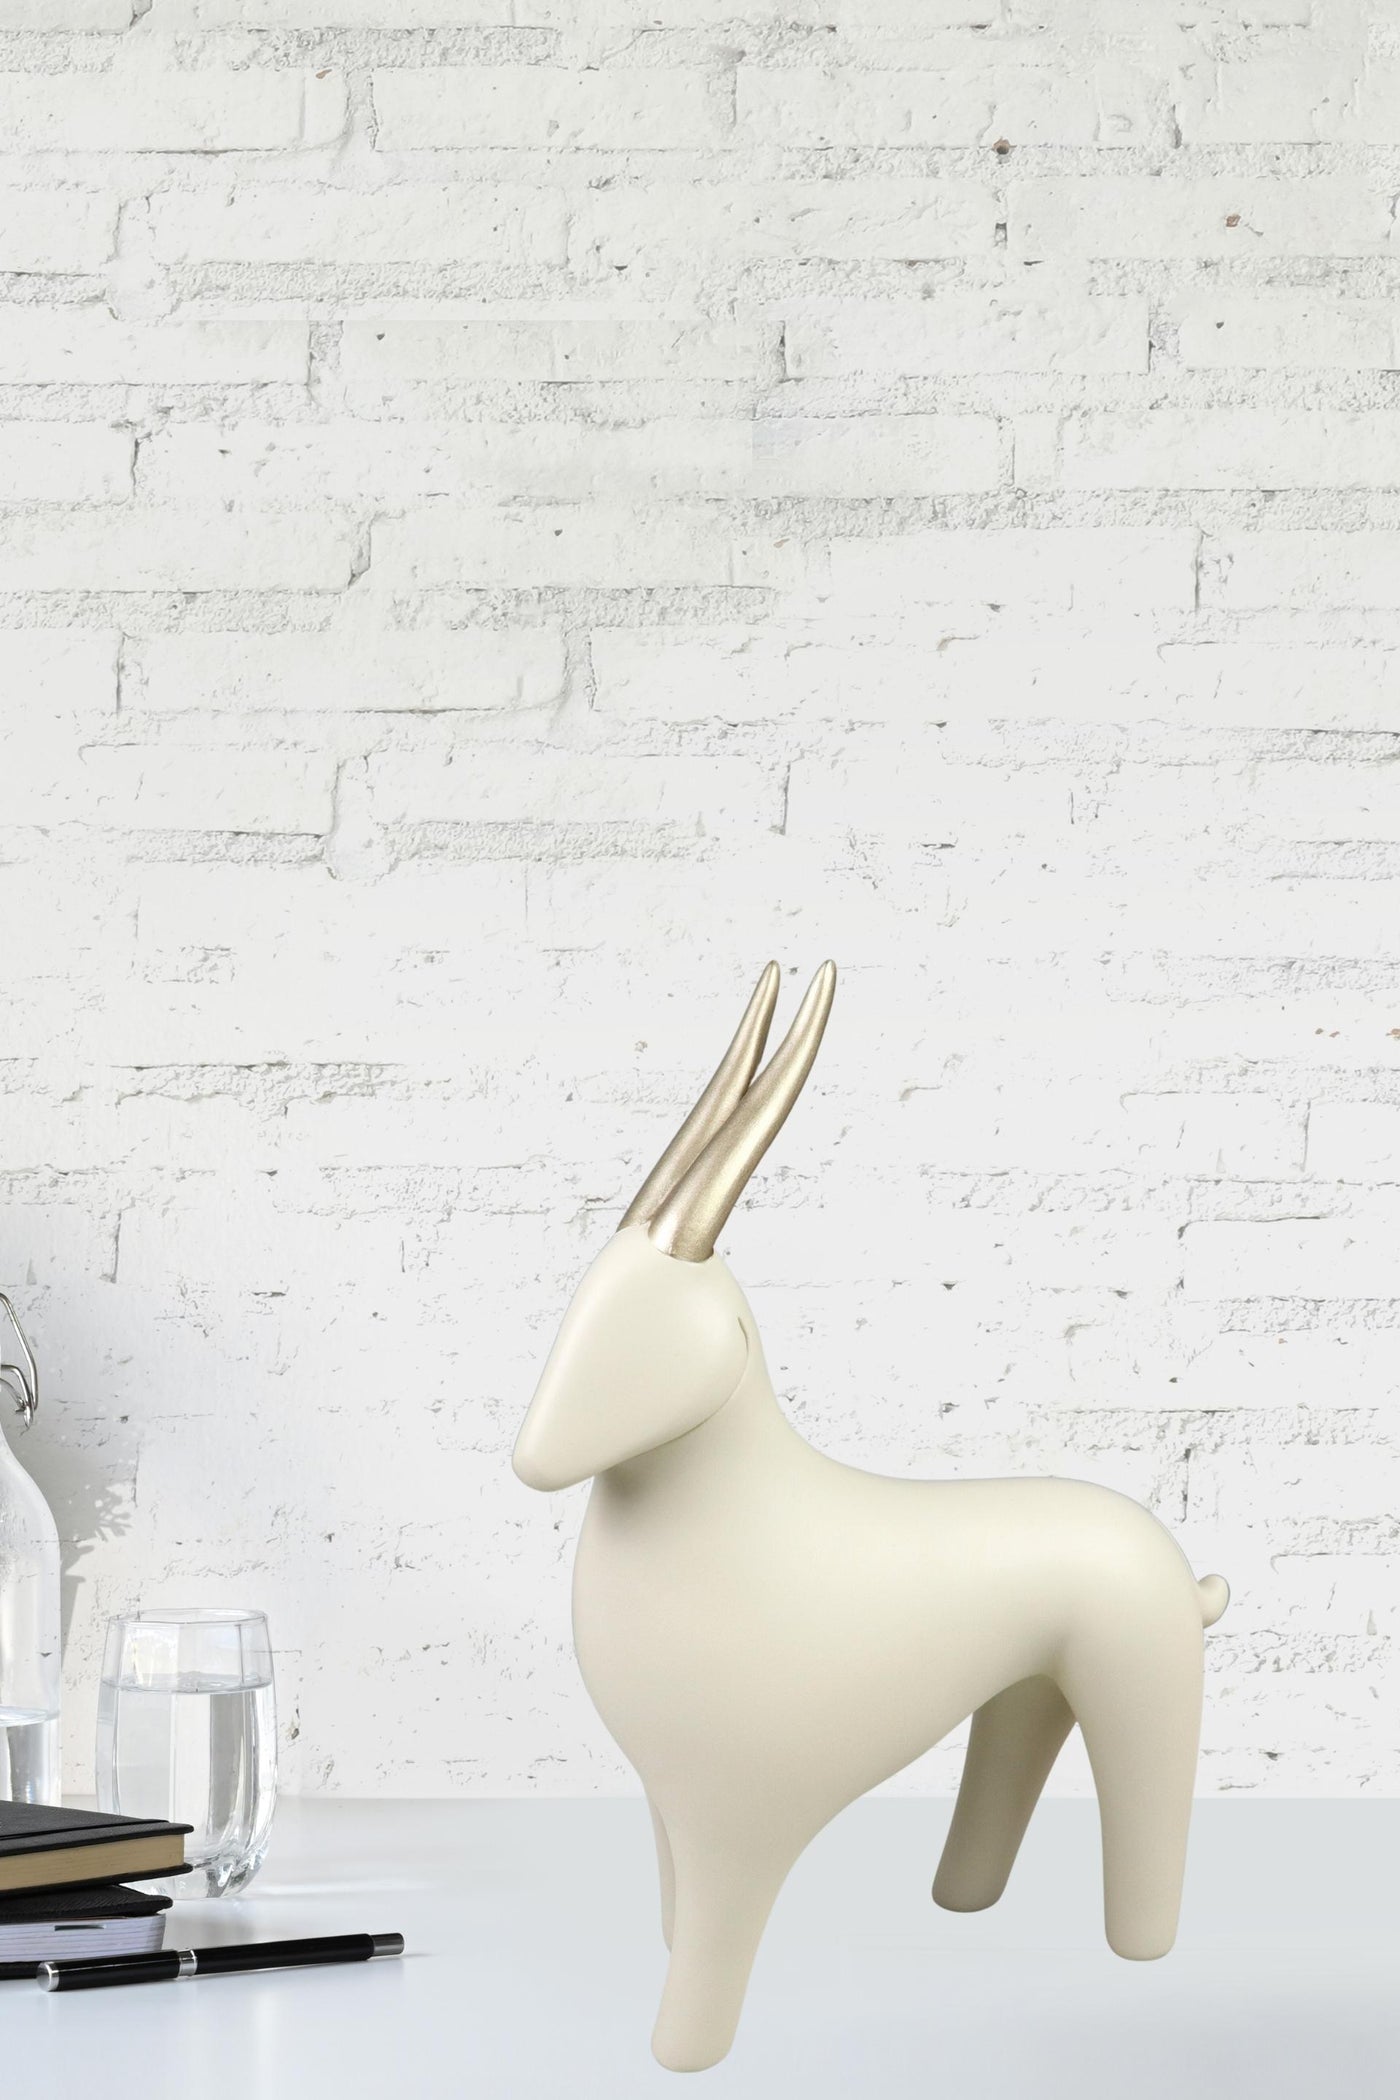 Lucky Sheep Statue for your home or office decor